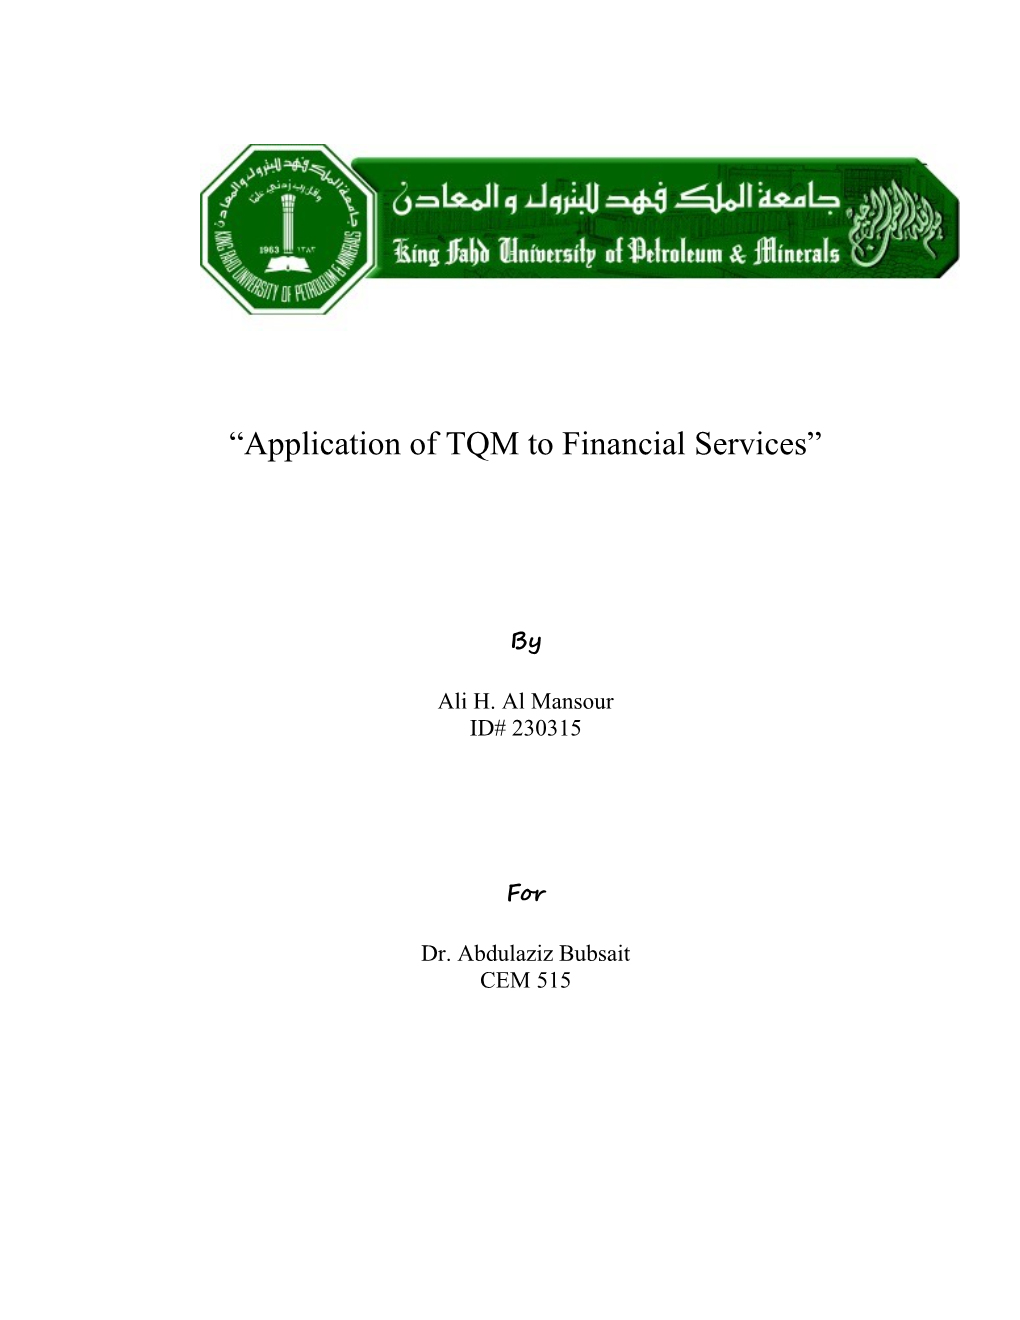 Application of TQM to Financial Services